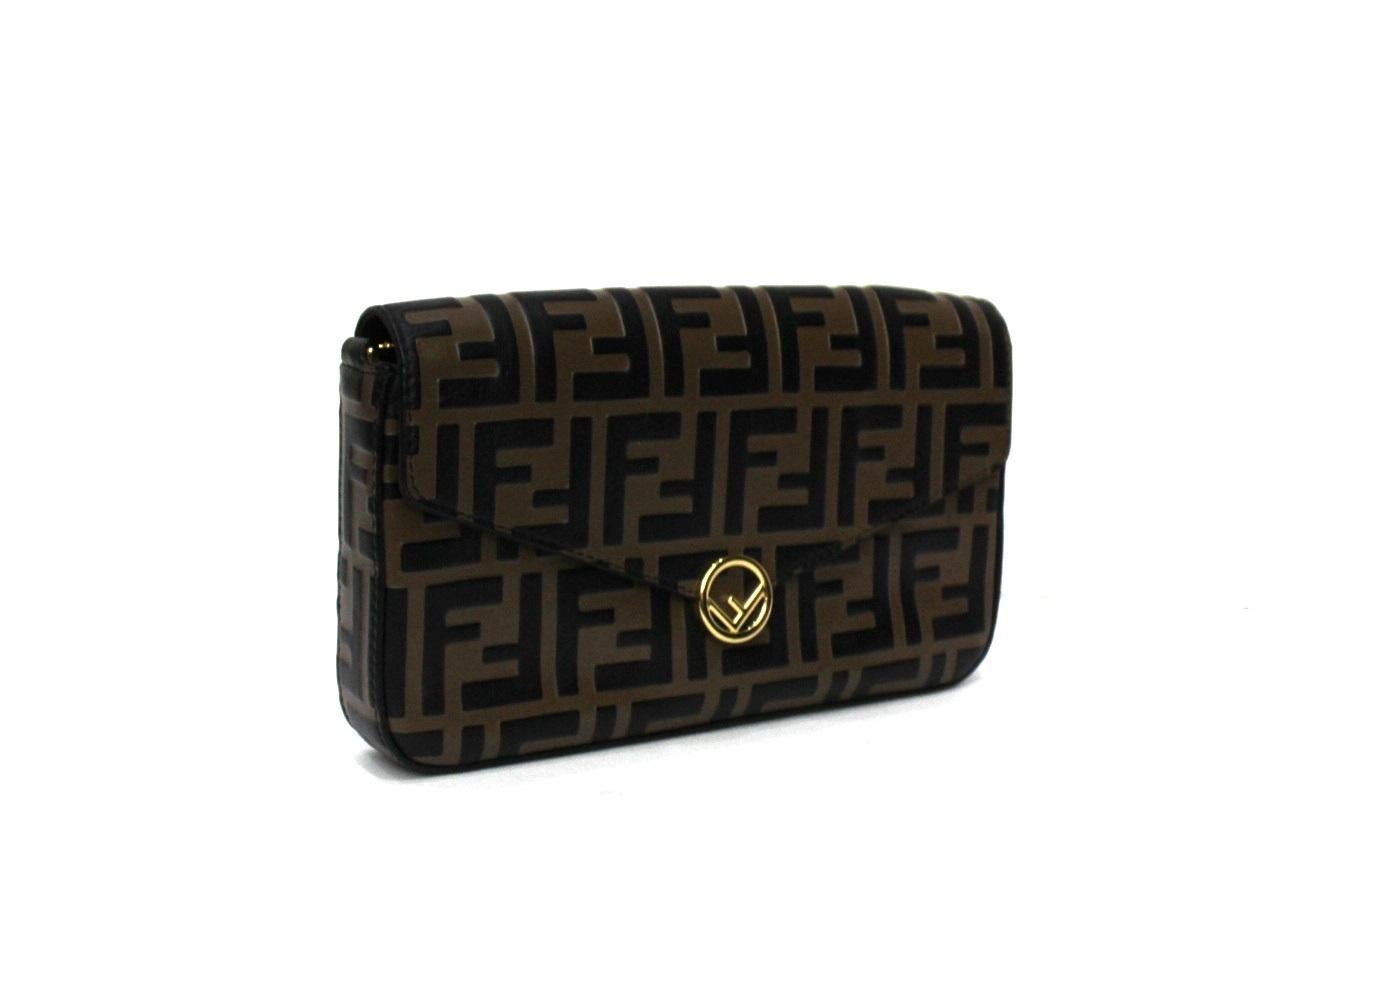 Fantastic Fendi clutch bag in FF logo leather with golden hardware.

Magnetic button closure. Internally capacious for the essentials.

Equipped with chain shoulder strap. Excellent condition.